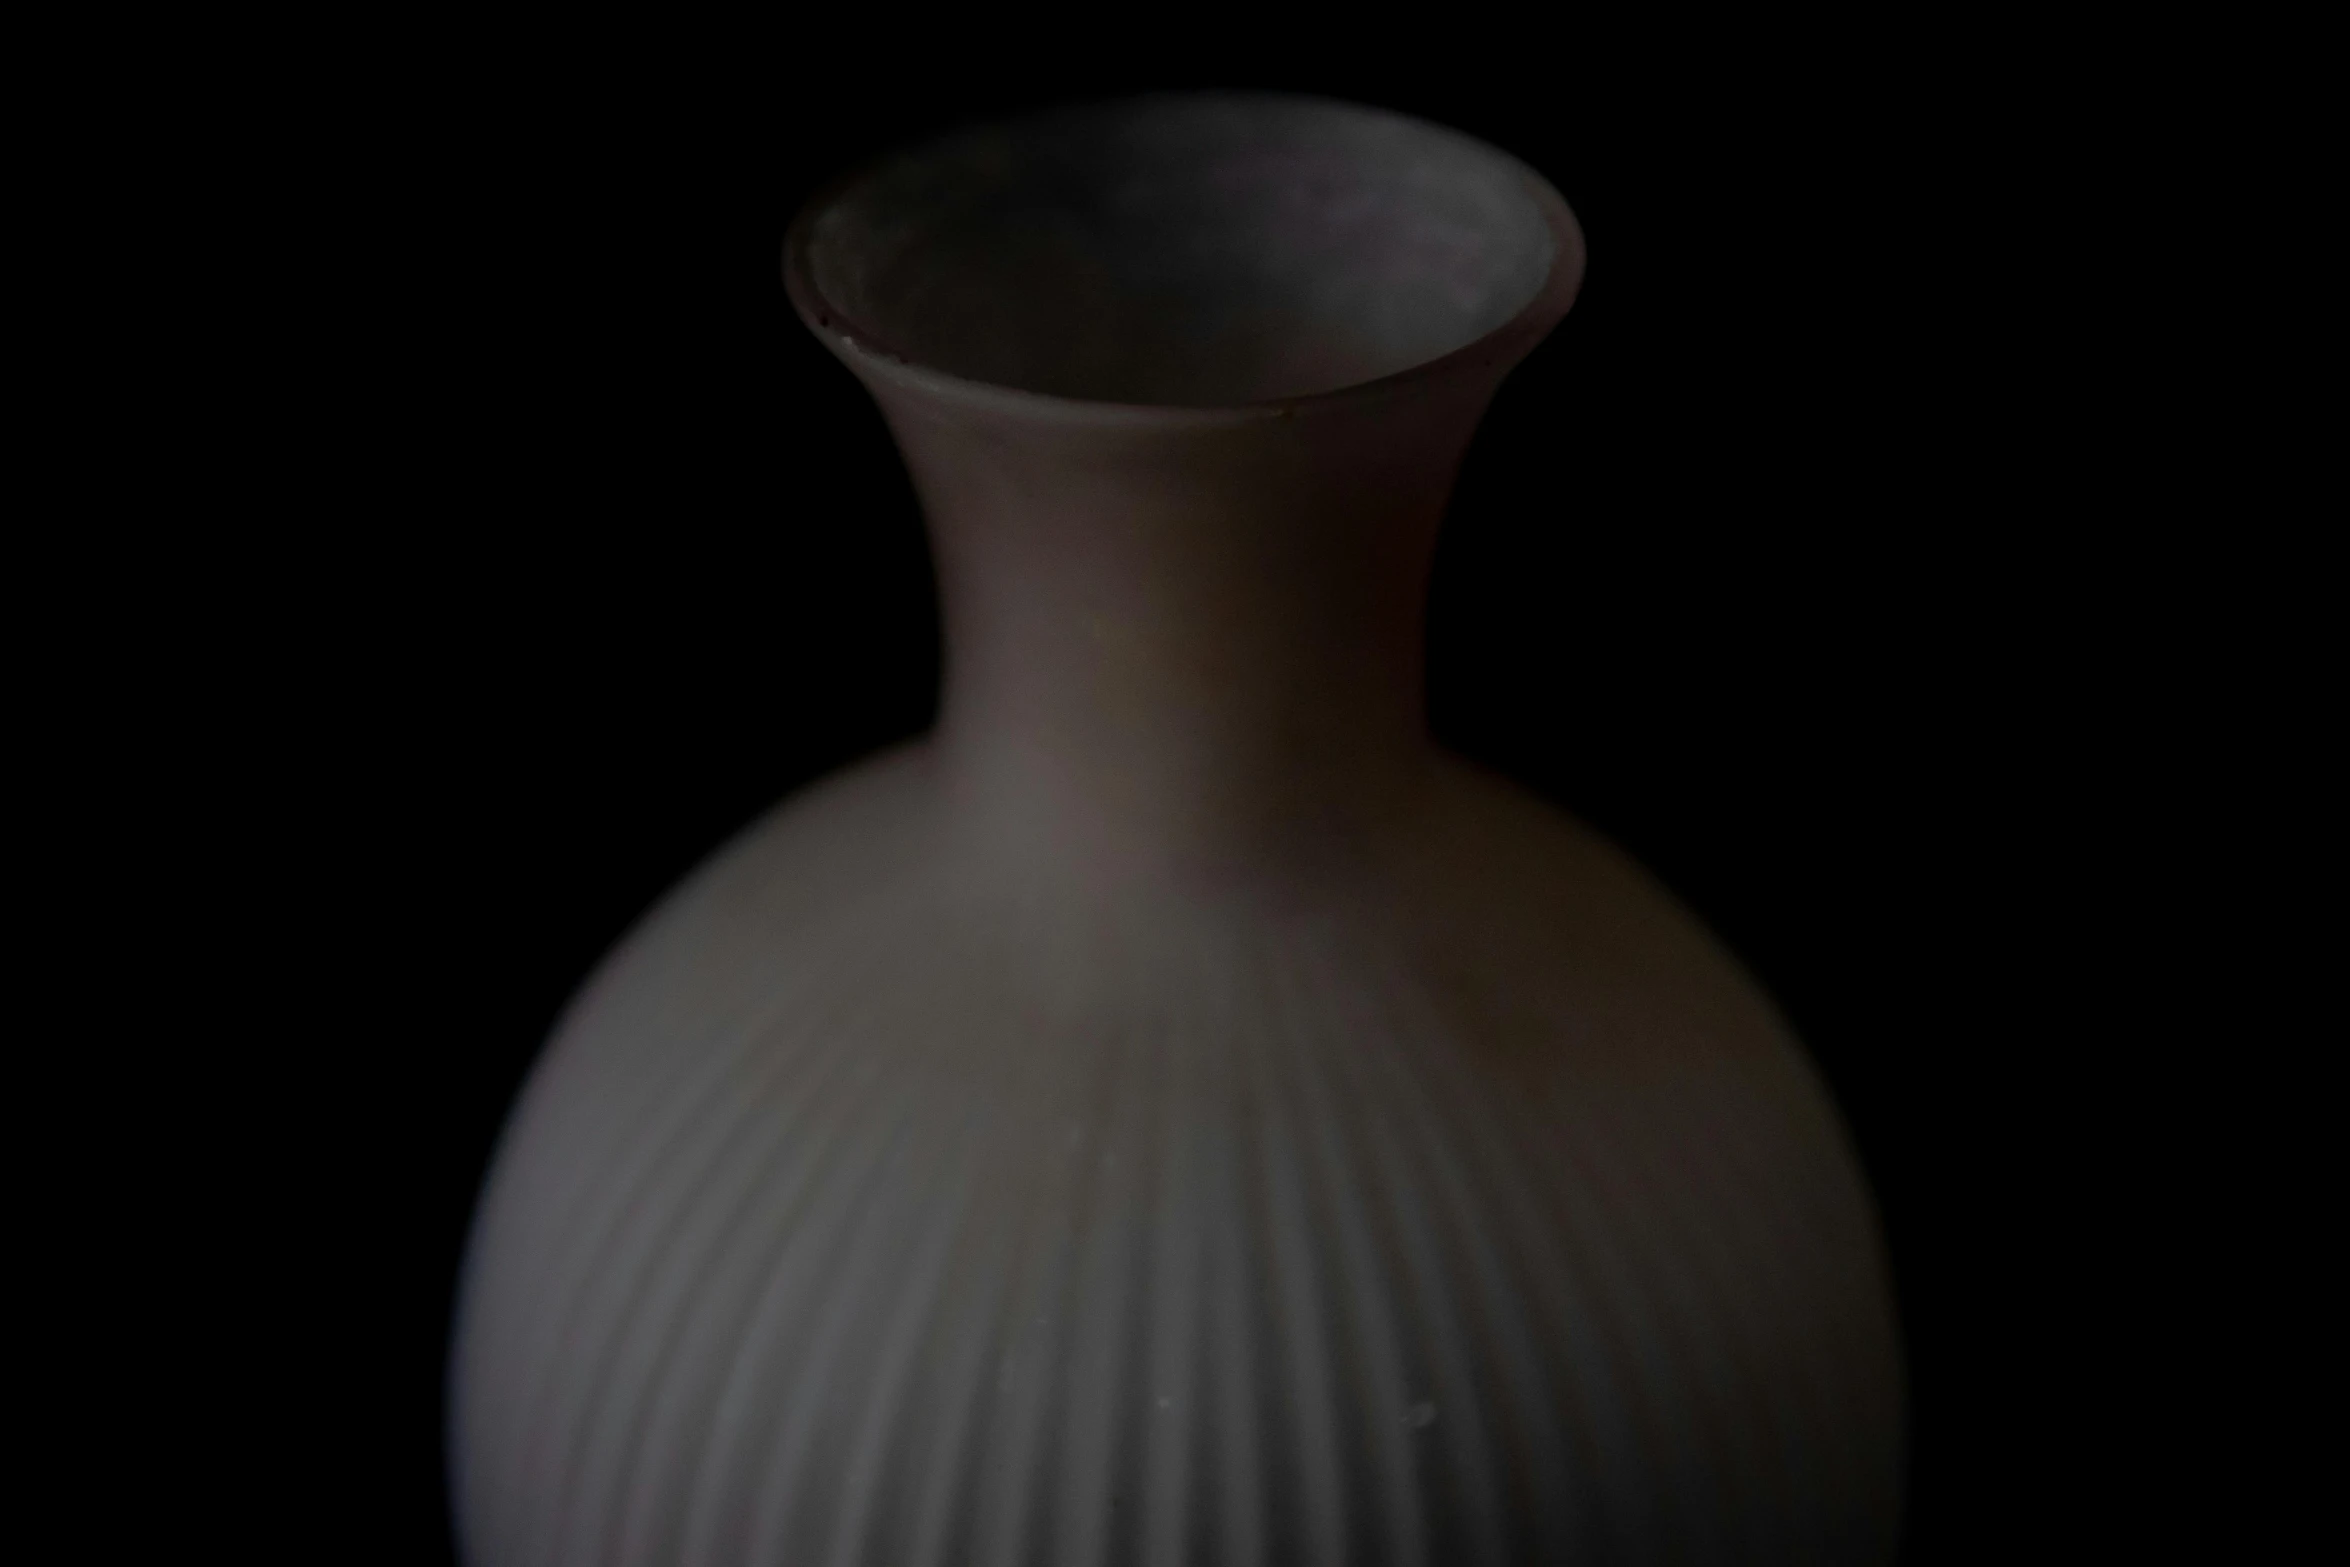 a vase with wavy lines of white on a black background